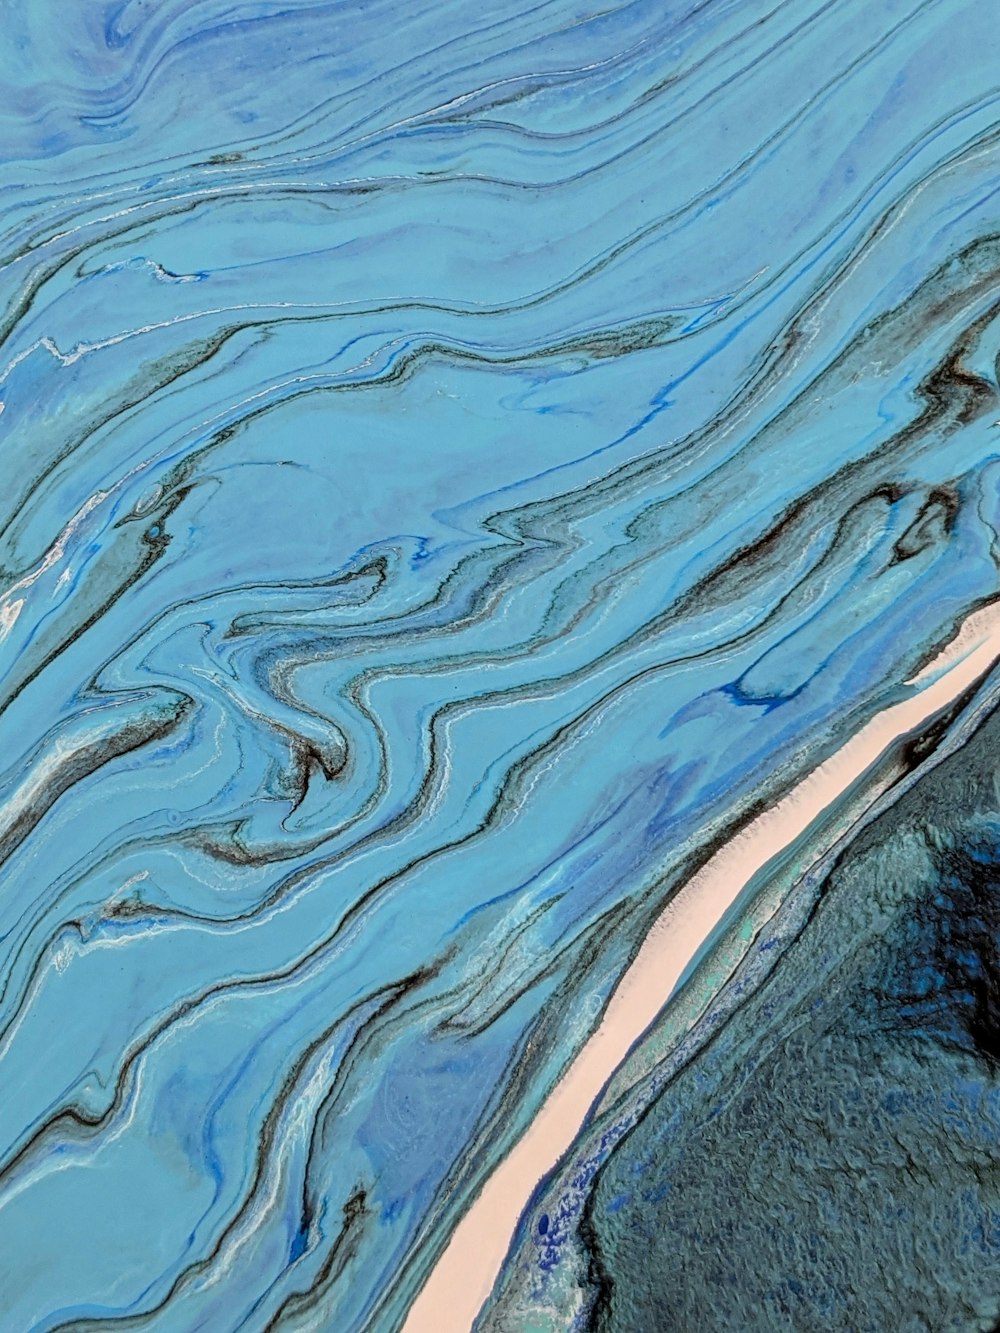 a close up of a water surface with blue and white colors